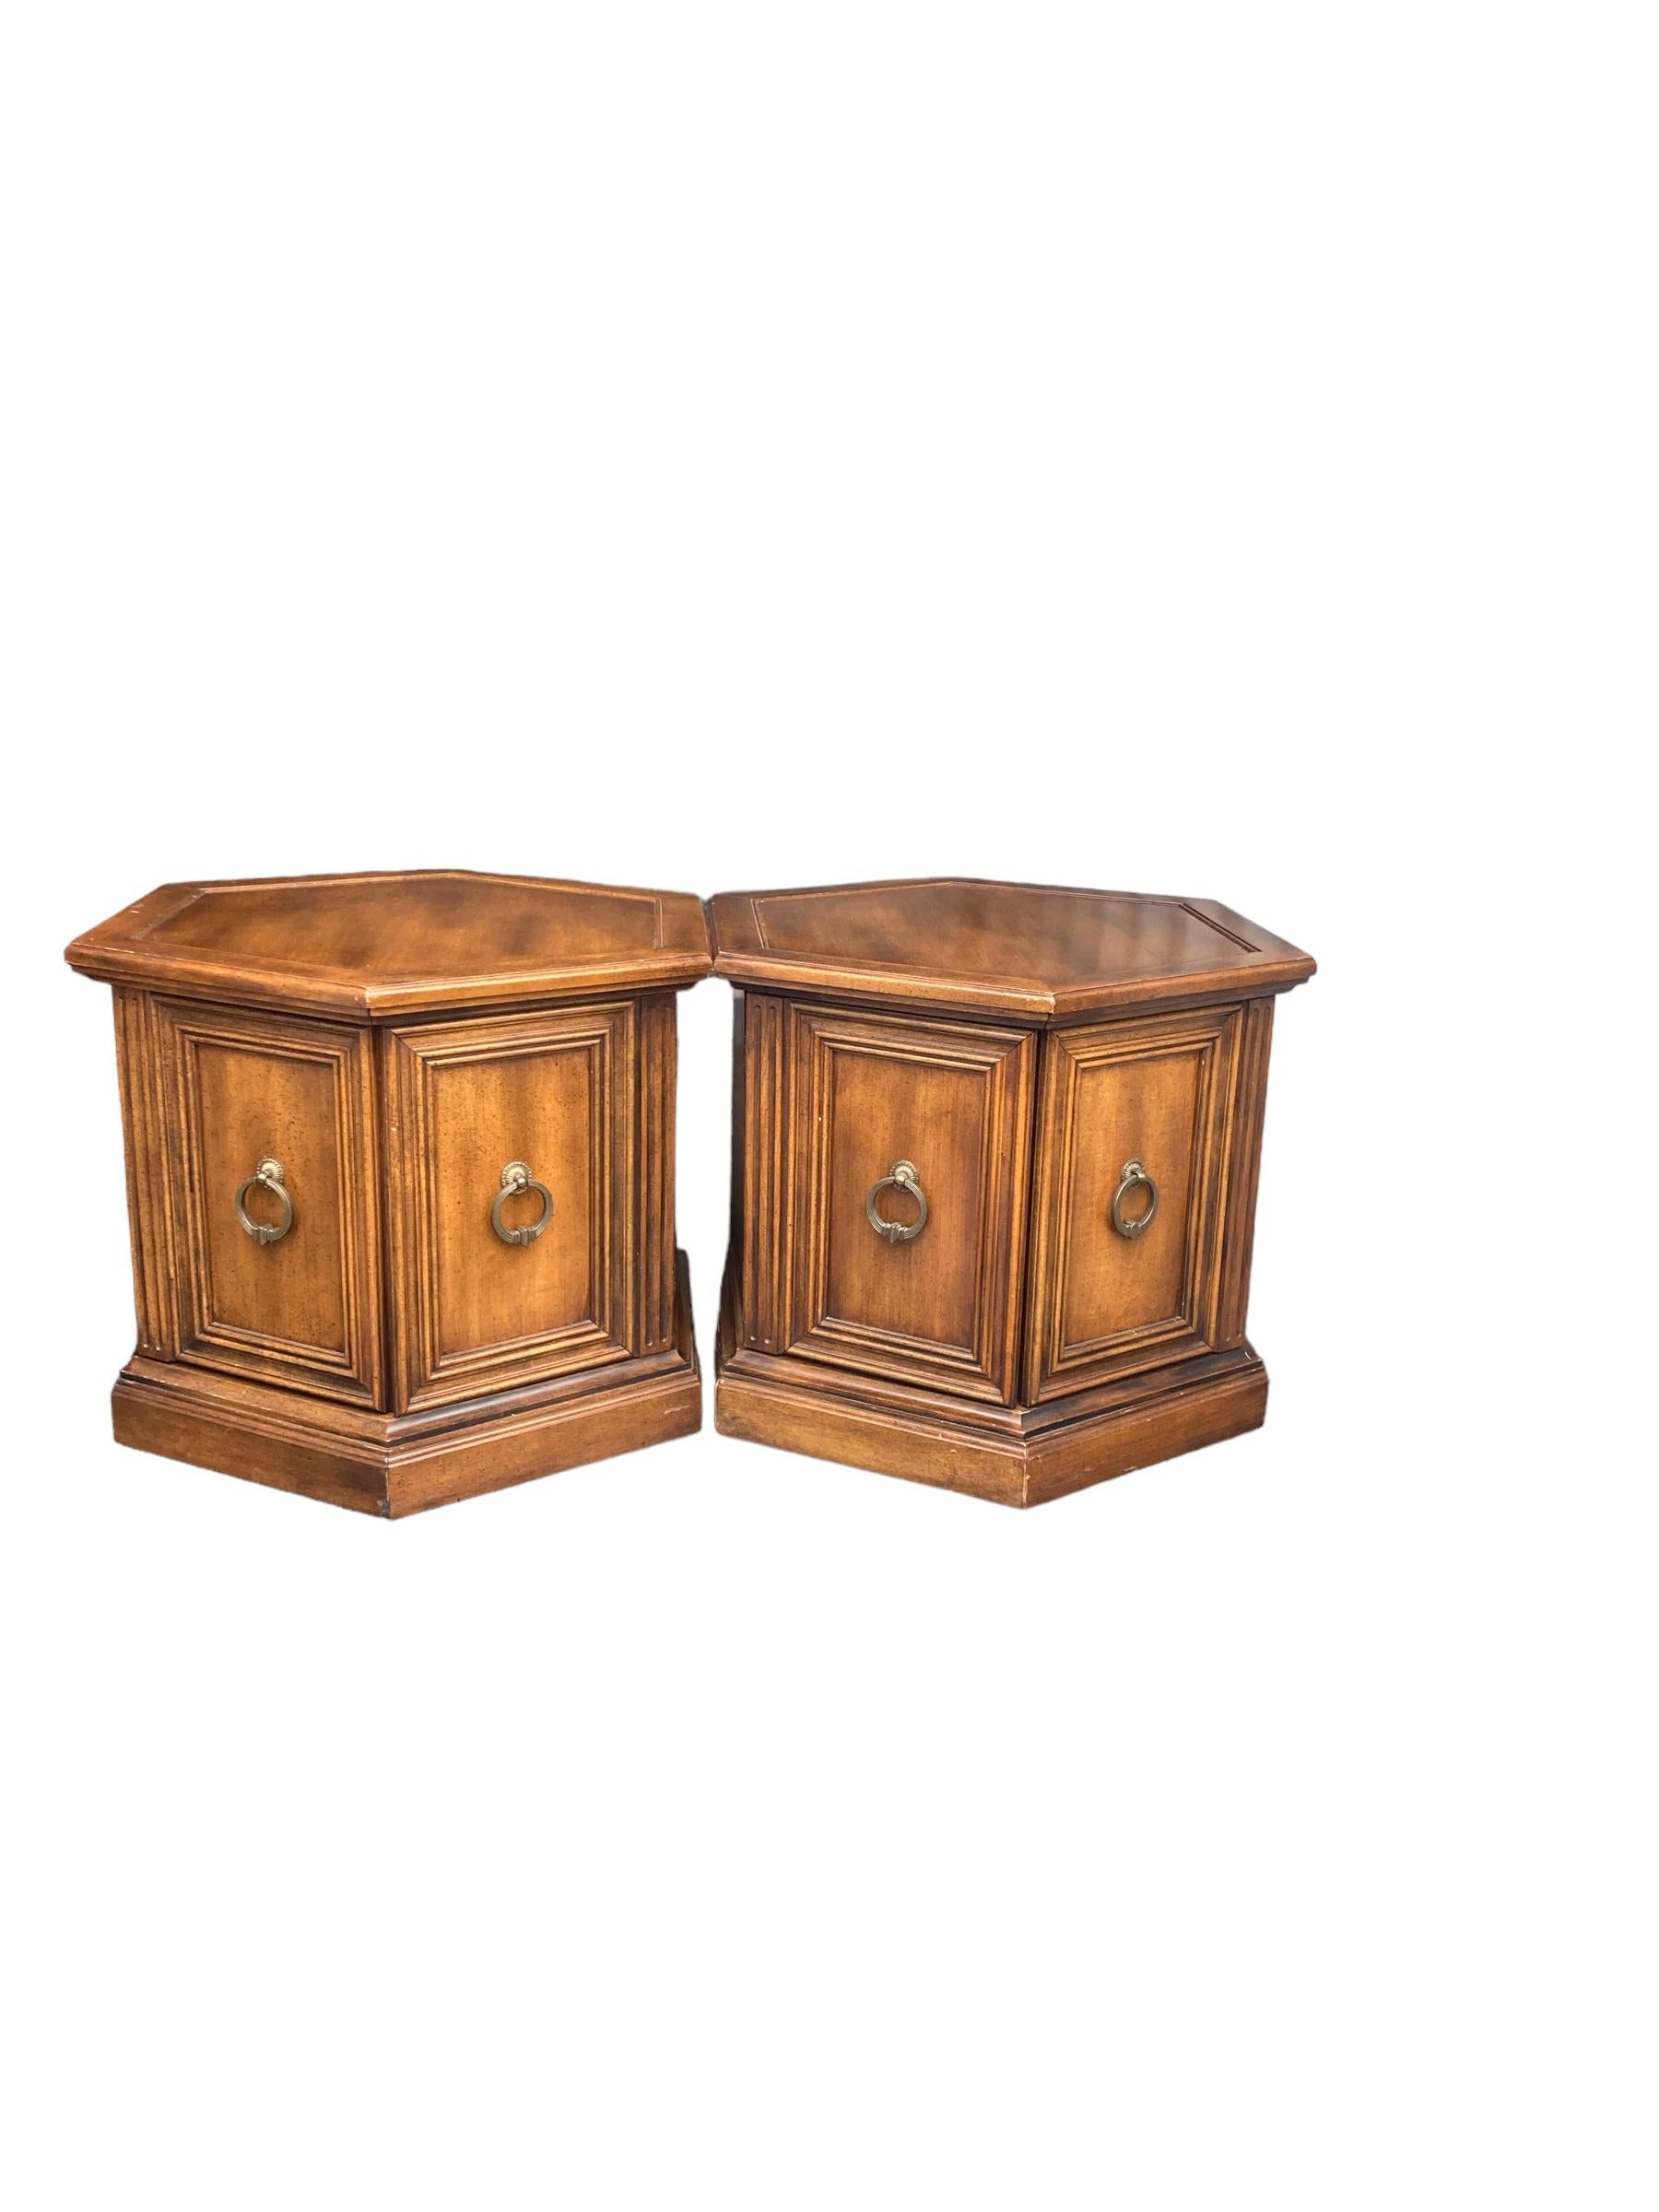 Gothic Revival A Pair of Gothic Style Oak Hexagonal Side Tables For Sale